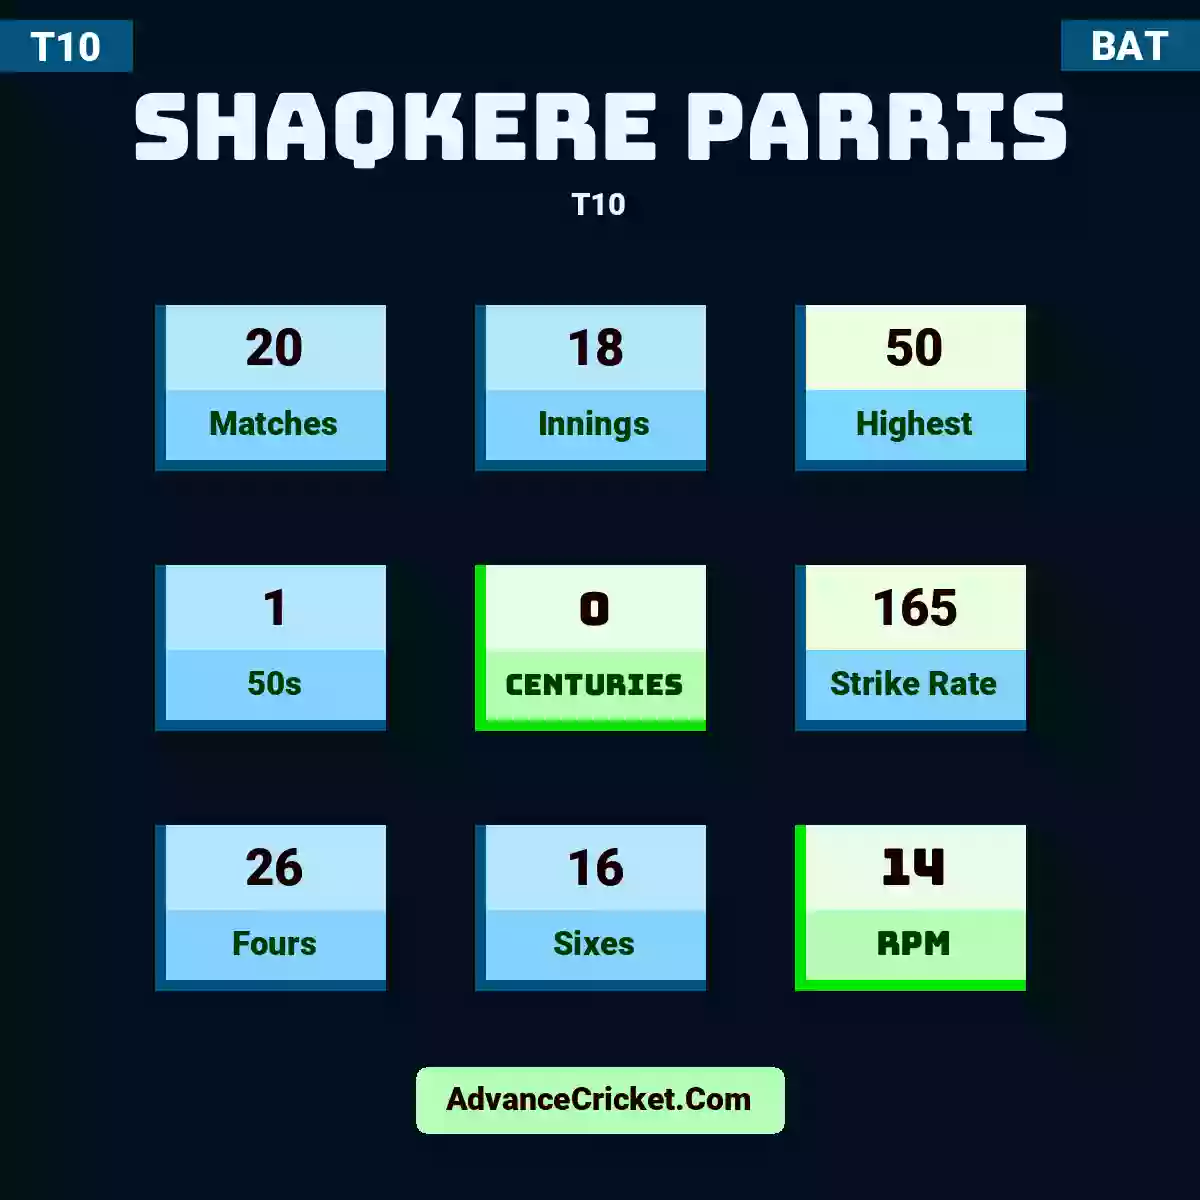 Shaqkere Parris T10 , Shaqkere Parris played 20 matches, scored 50 runs as highest, 1 half-centuries, and 0 centuries, with a strike rate of 165. S.Parris hit 26 fours and 16 sixes, with an RPM of 14.